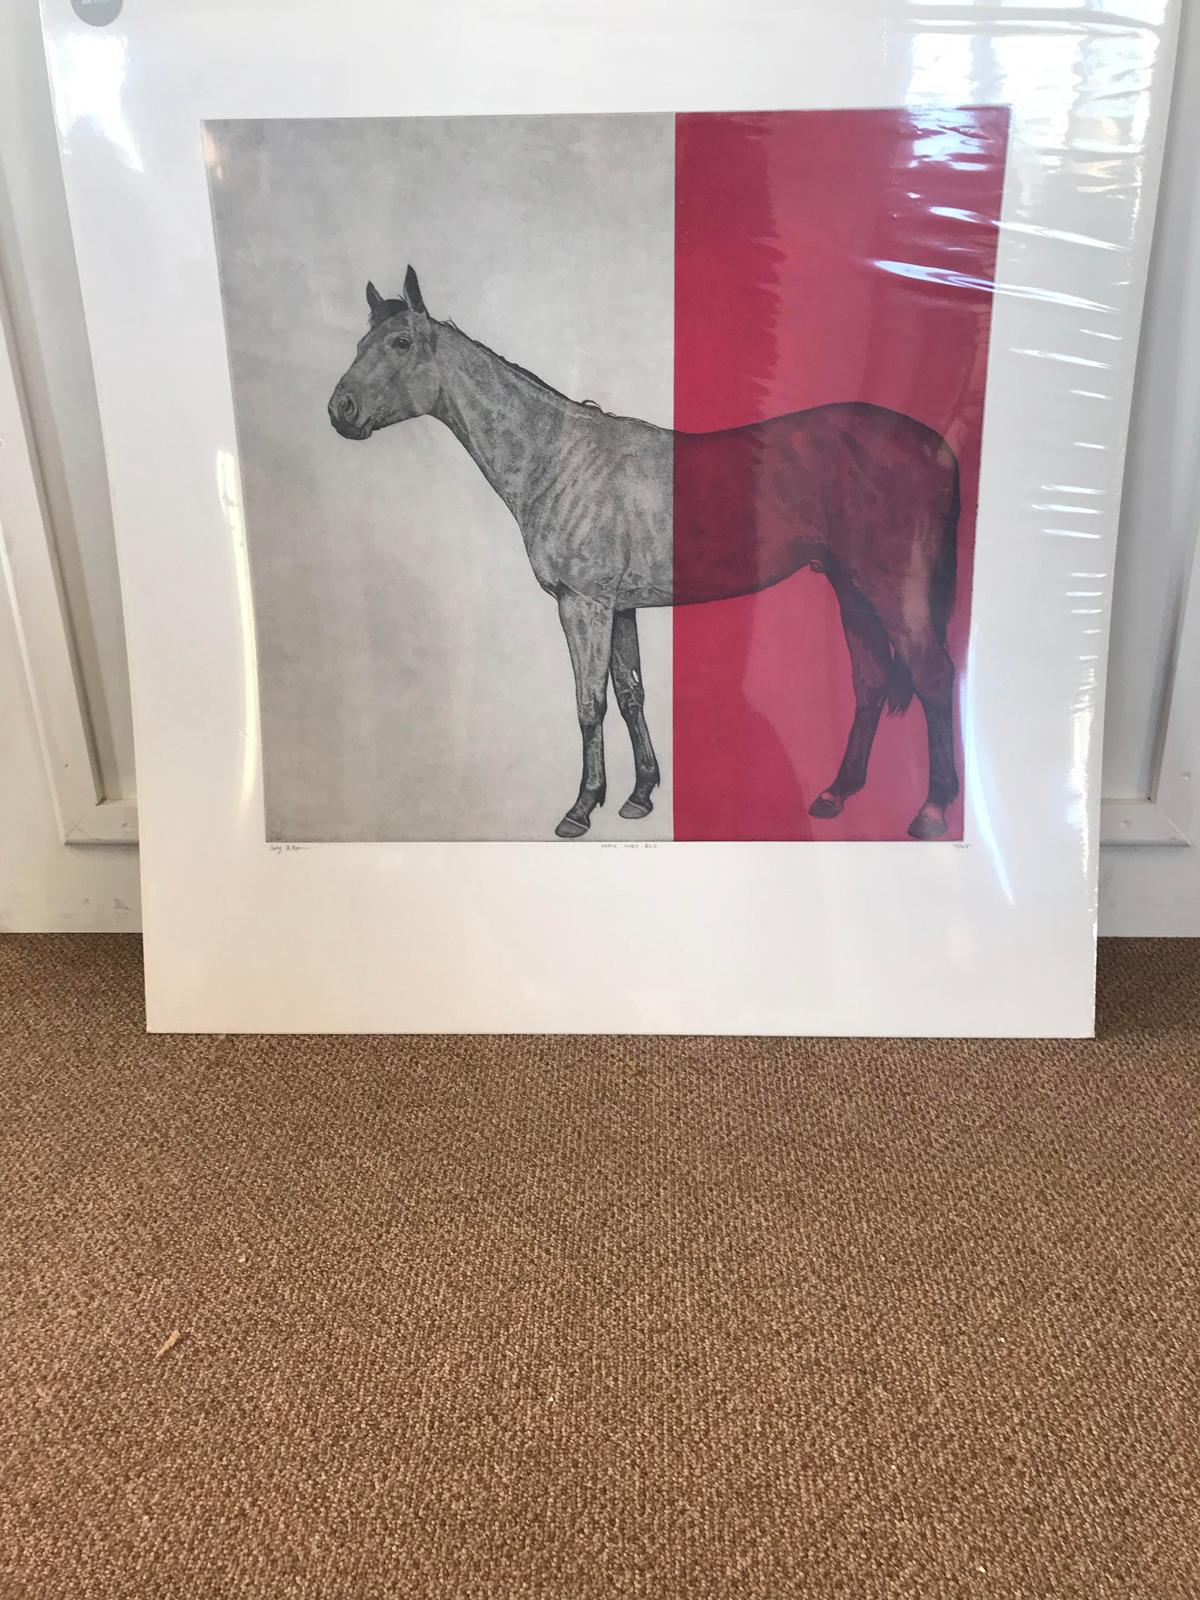 Guy Allen
Horse Study Red
Limited Edition Screen Print
Edition of 45
Sheet Size: H 77cm x 80cm x D 0.2cm
Sold Unframed

Horse Study Red’s medium: Etching, aquatint and screen print colour overlay on 300g Somerset paper. Edition of 45. Signed by Guy